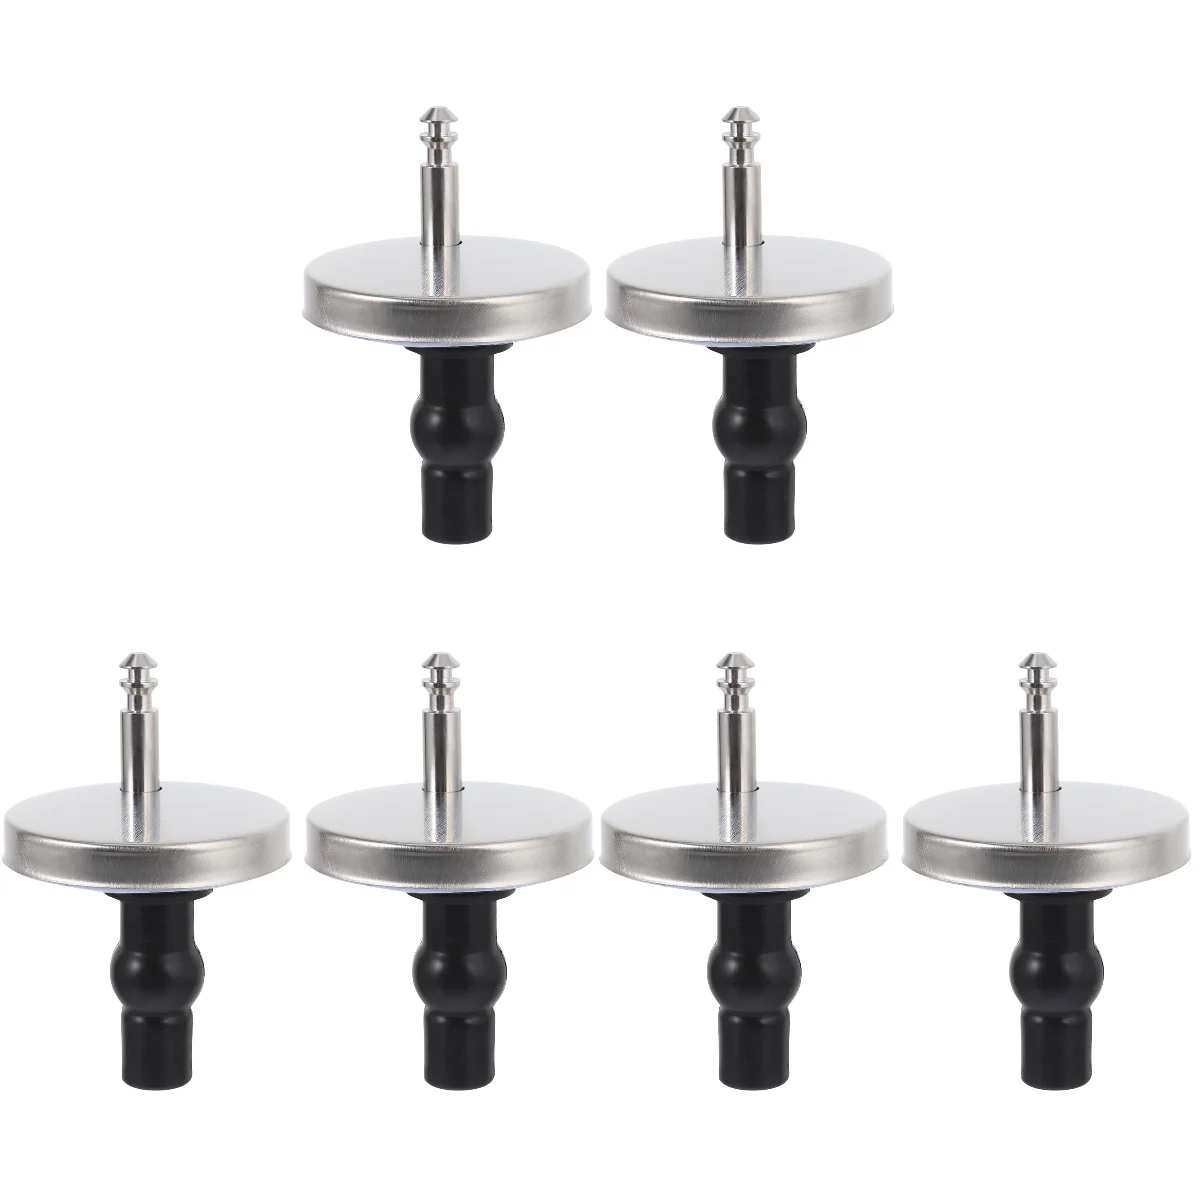 

6 Pcs Toilet Seat Screw Lid Bolts Screws Fixed Stainless Replacement Hinge Steel Fastener